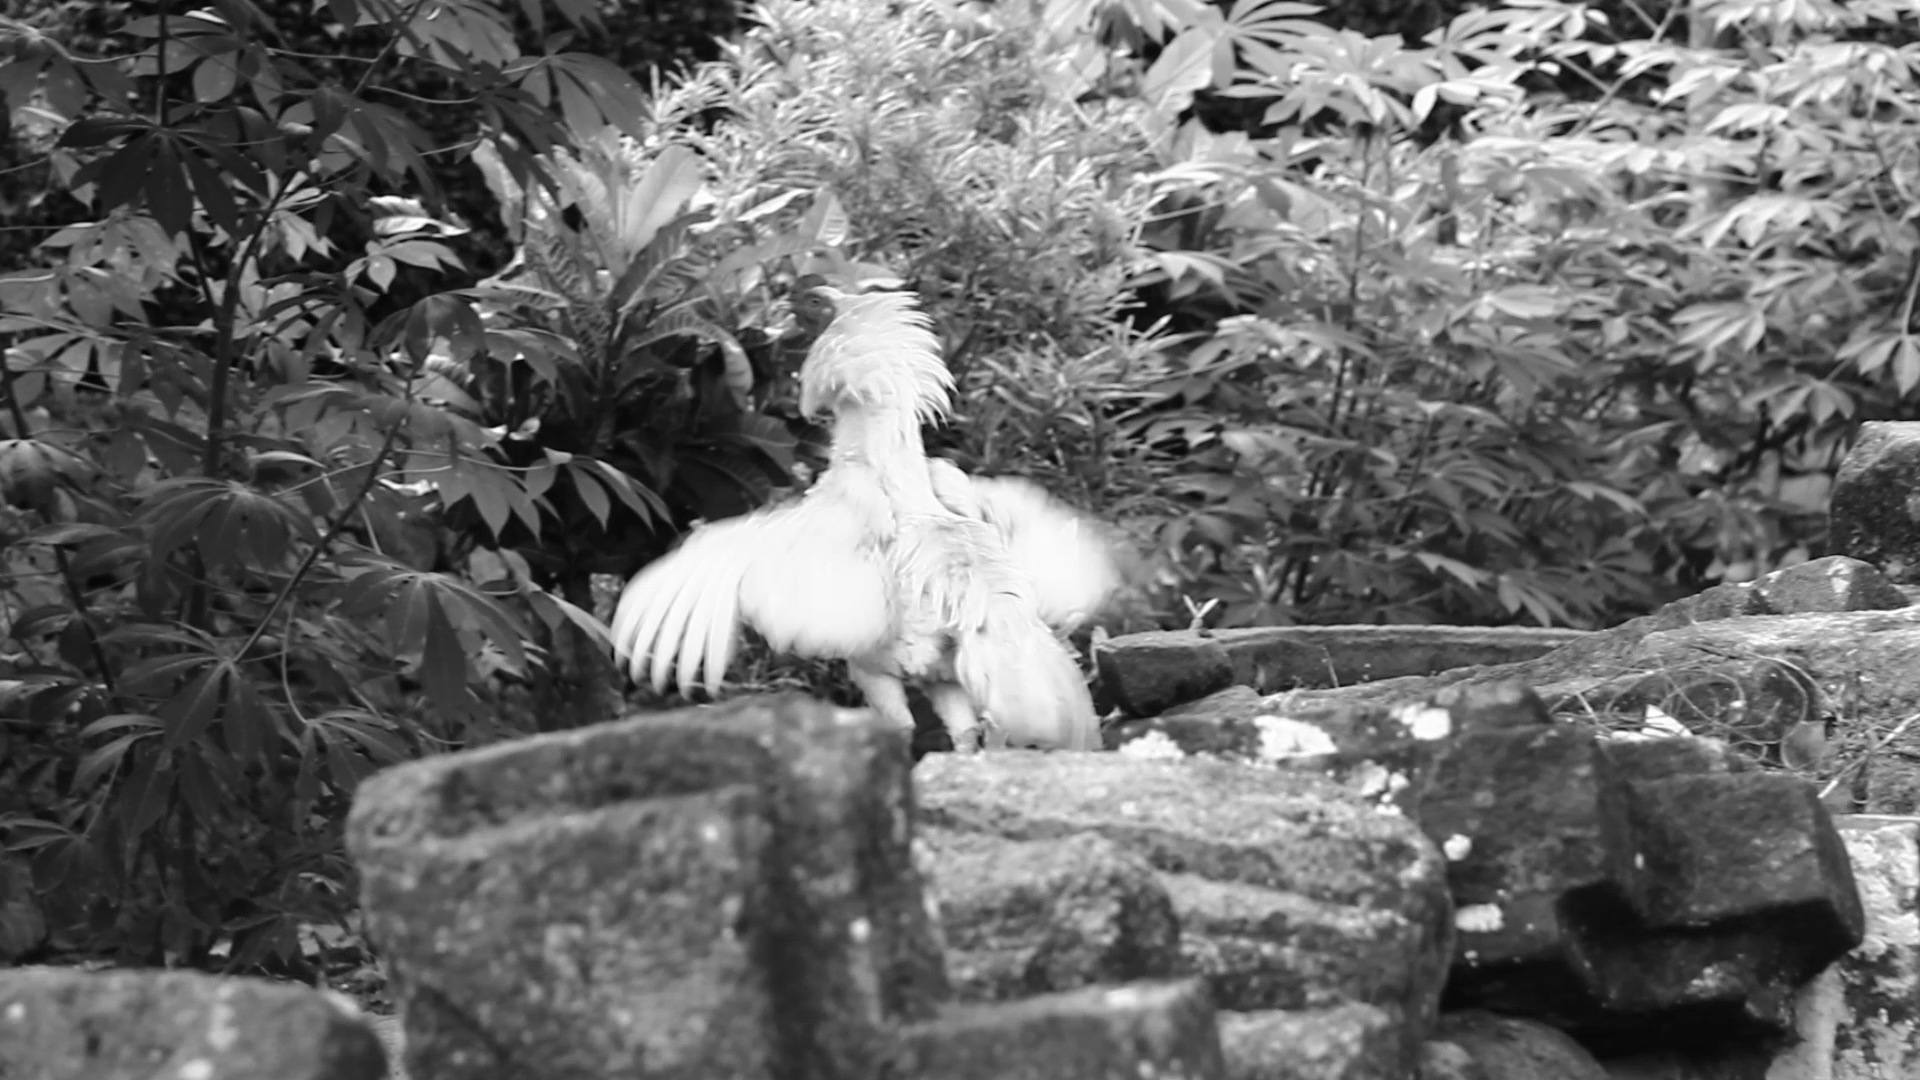 A Rooster of Candi Sari, in Monochrome